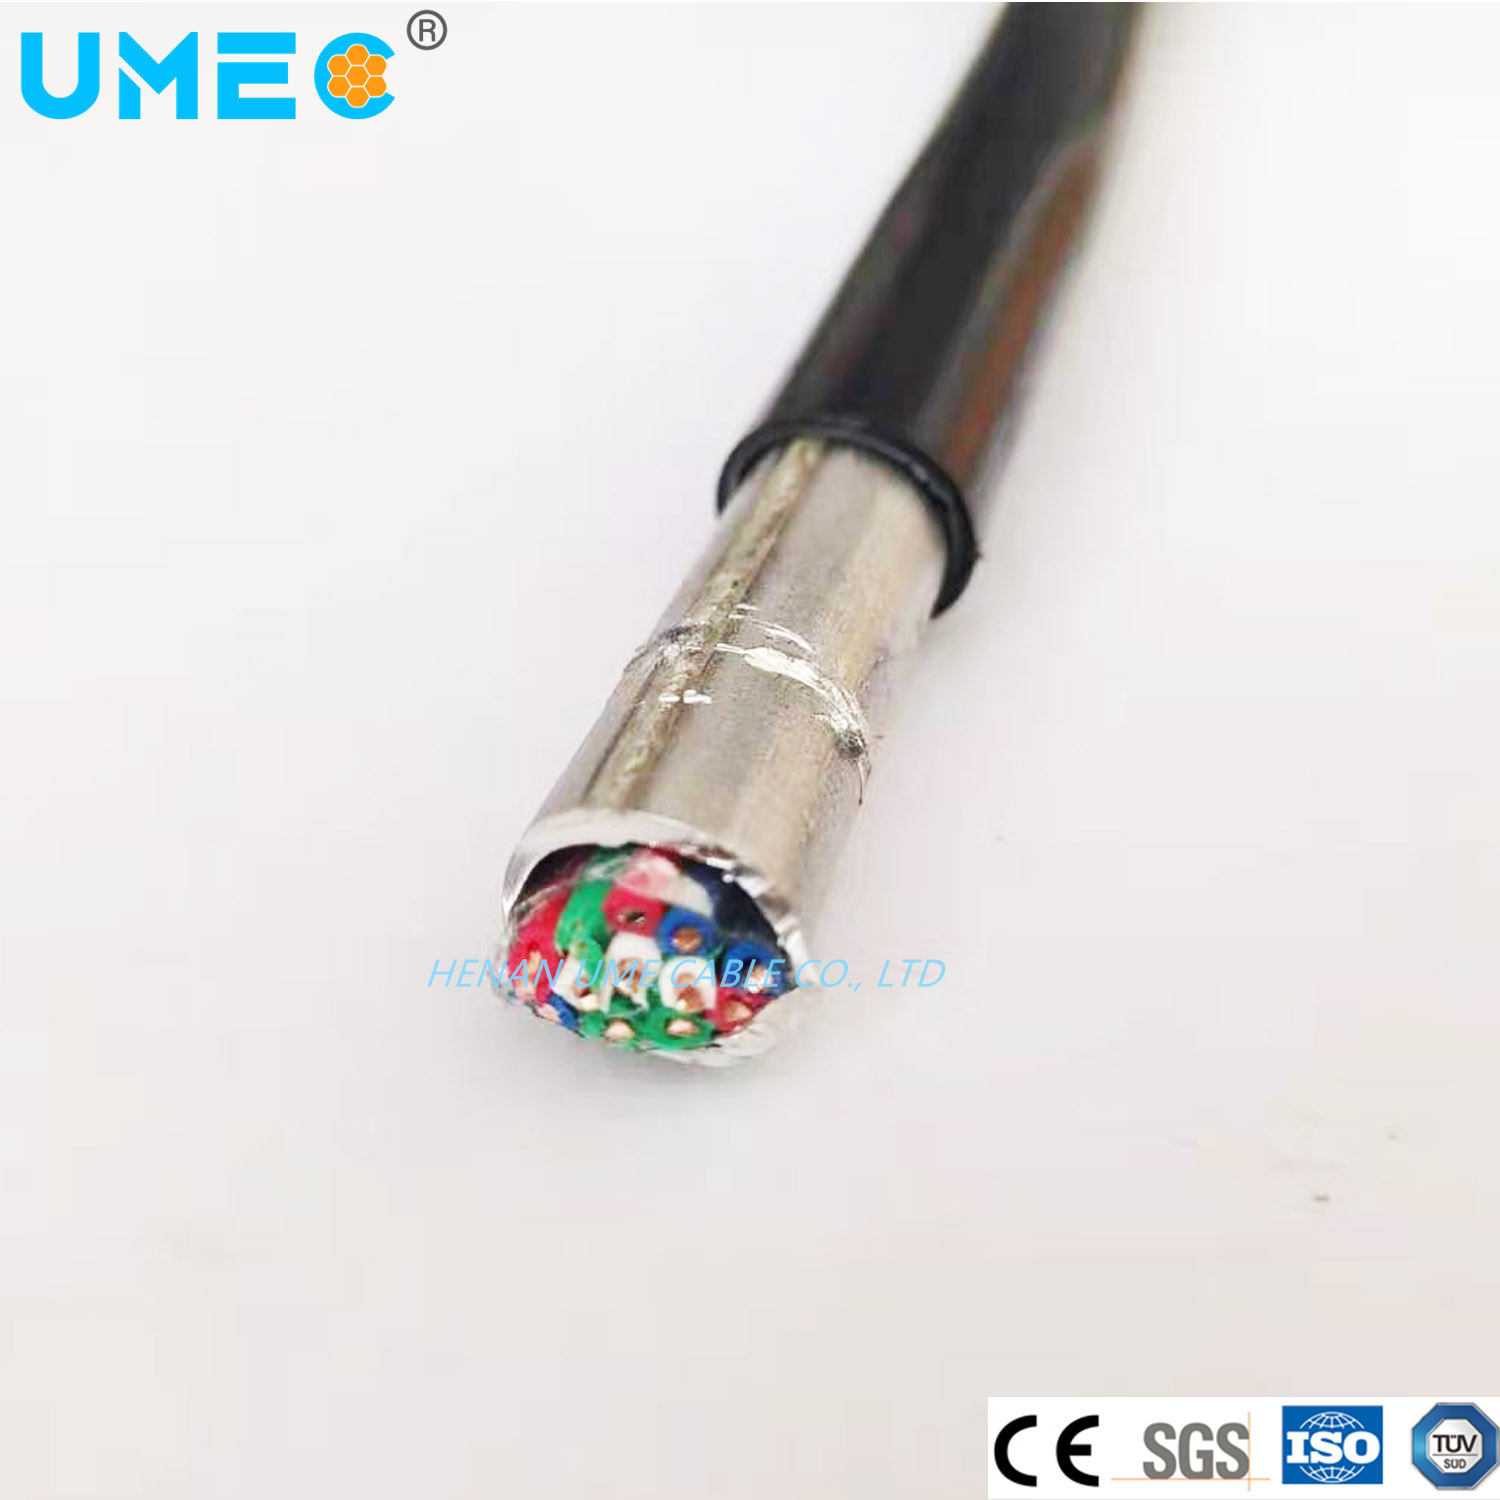 Railway Signal Cable 1.0mm Diameter Round Copper Wire 4 61 Cores Ptya23 (PTYAH23) Electrical Cable